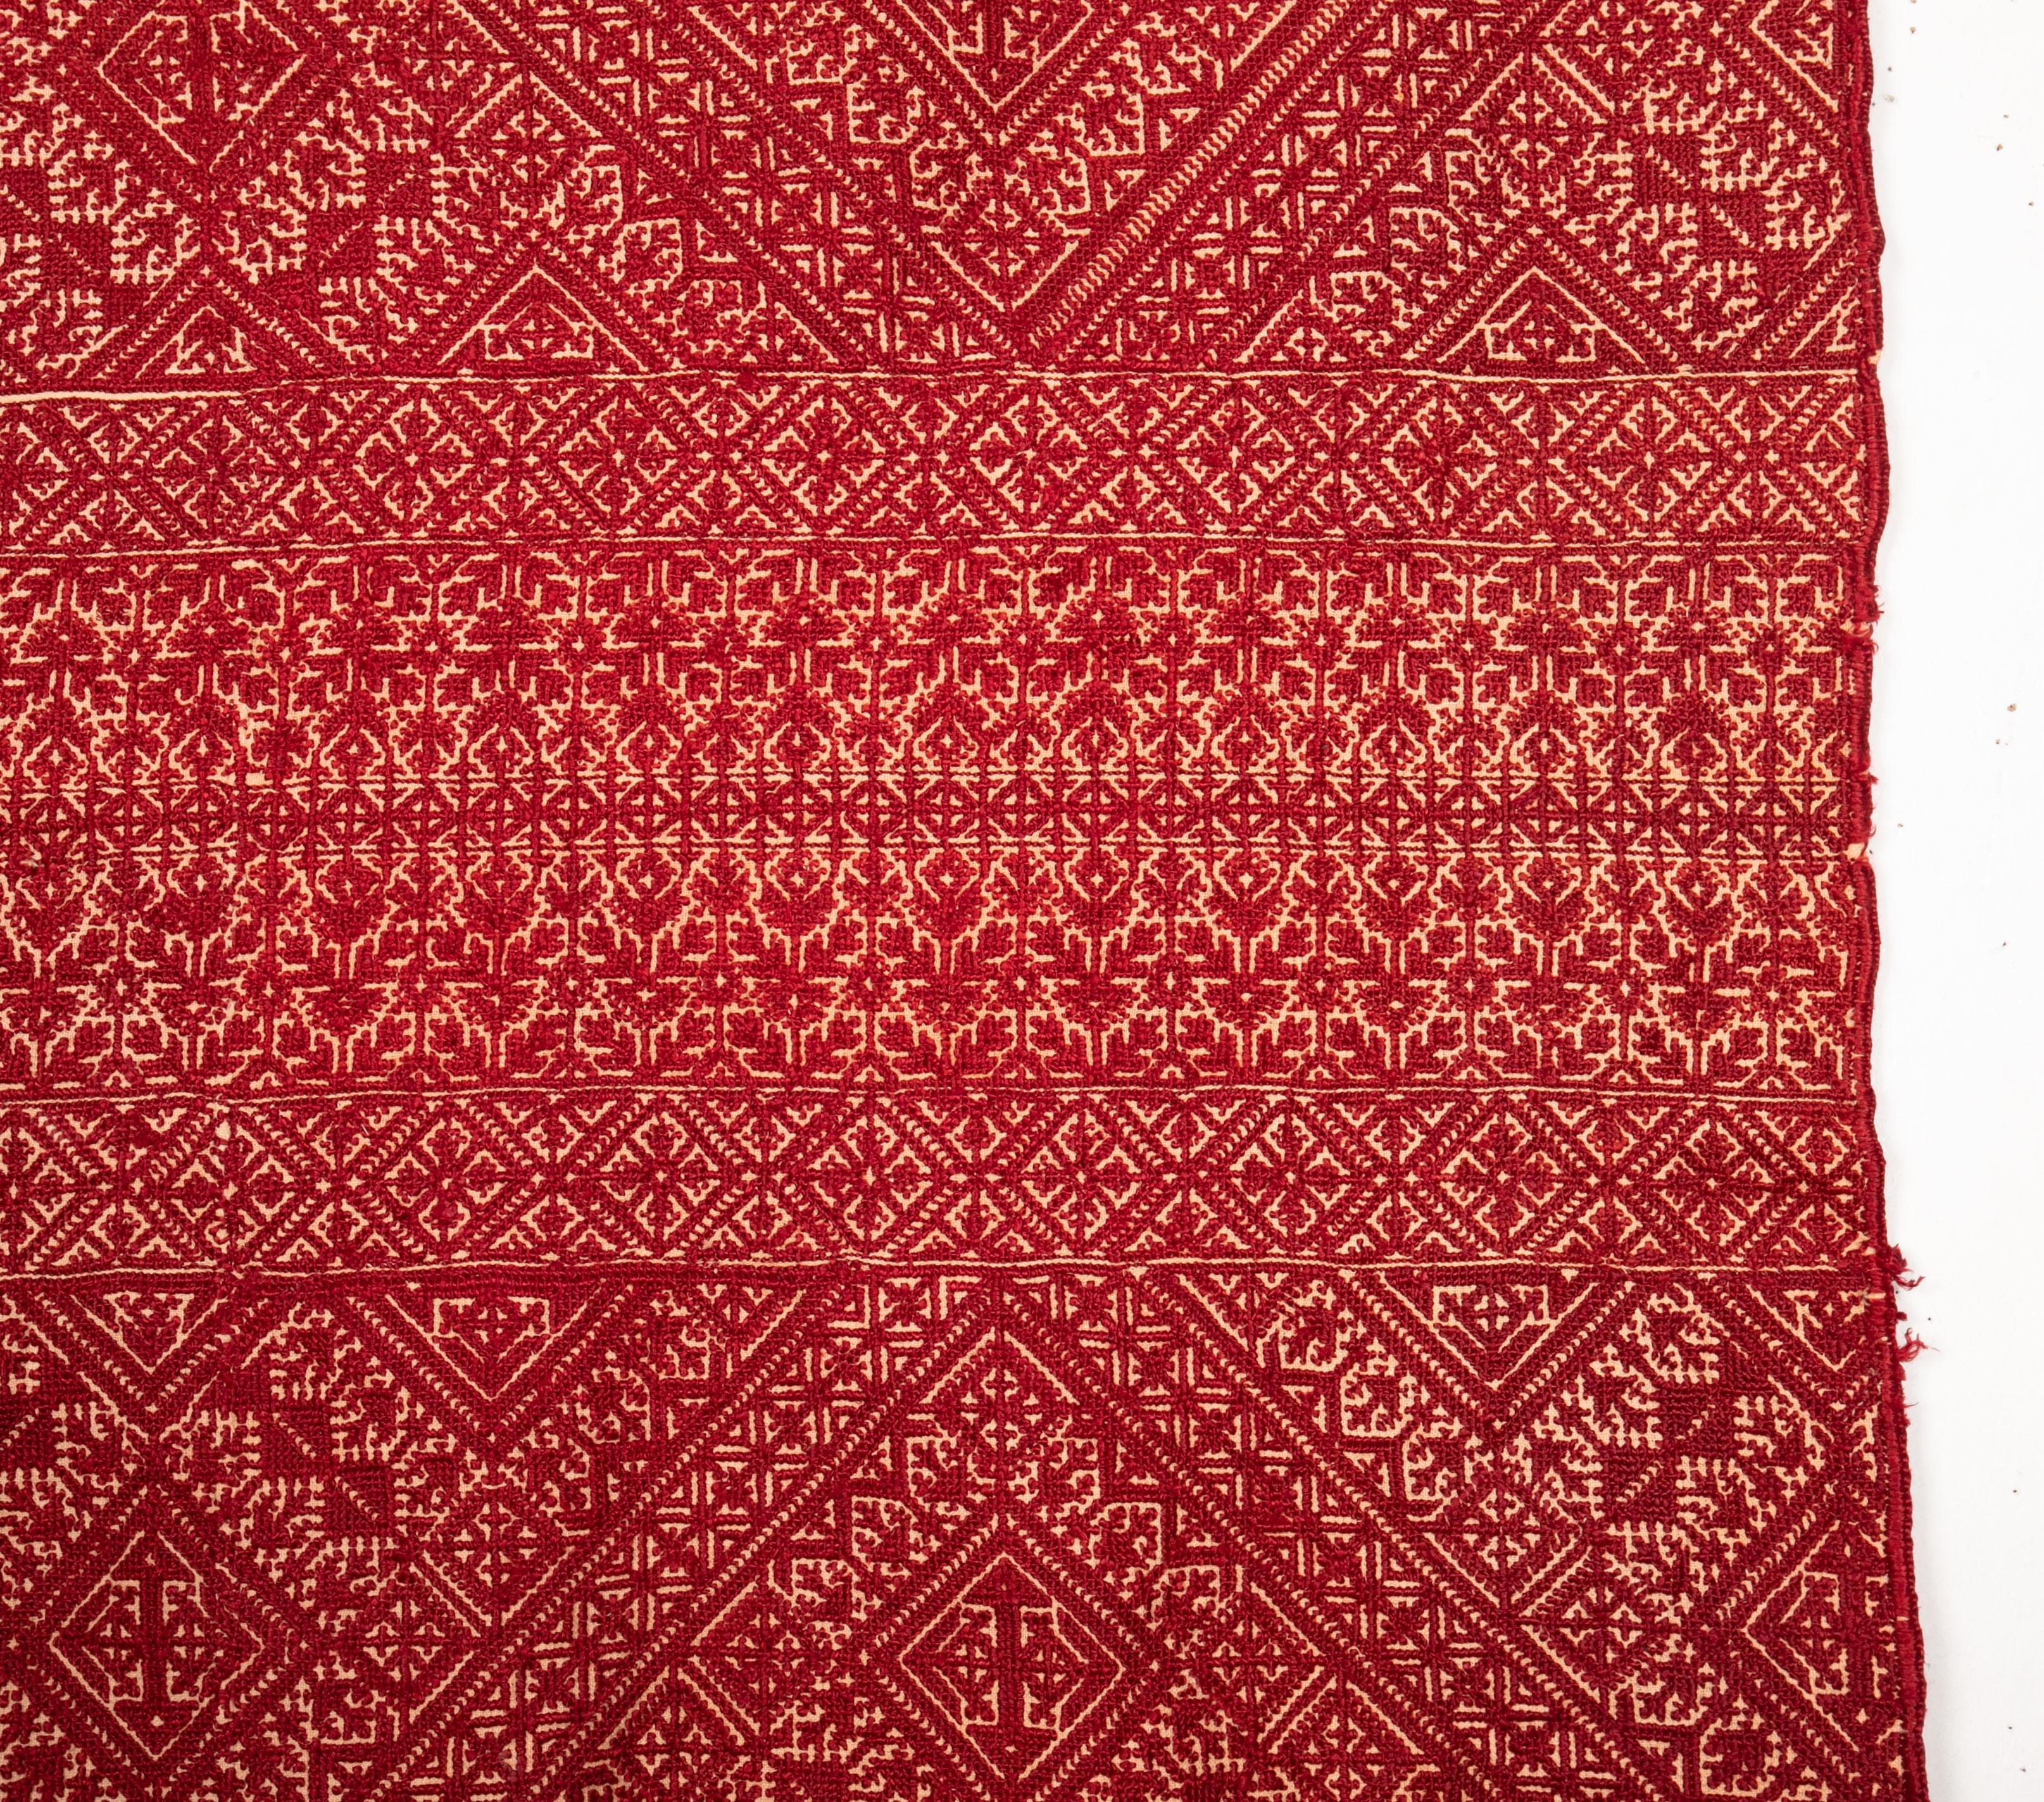 Embroidered Fez Silk Embroidery from Fez Morocco, Early 20th Century